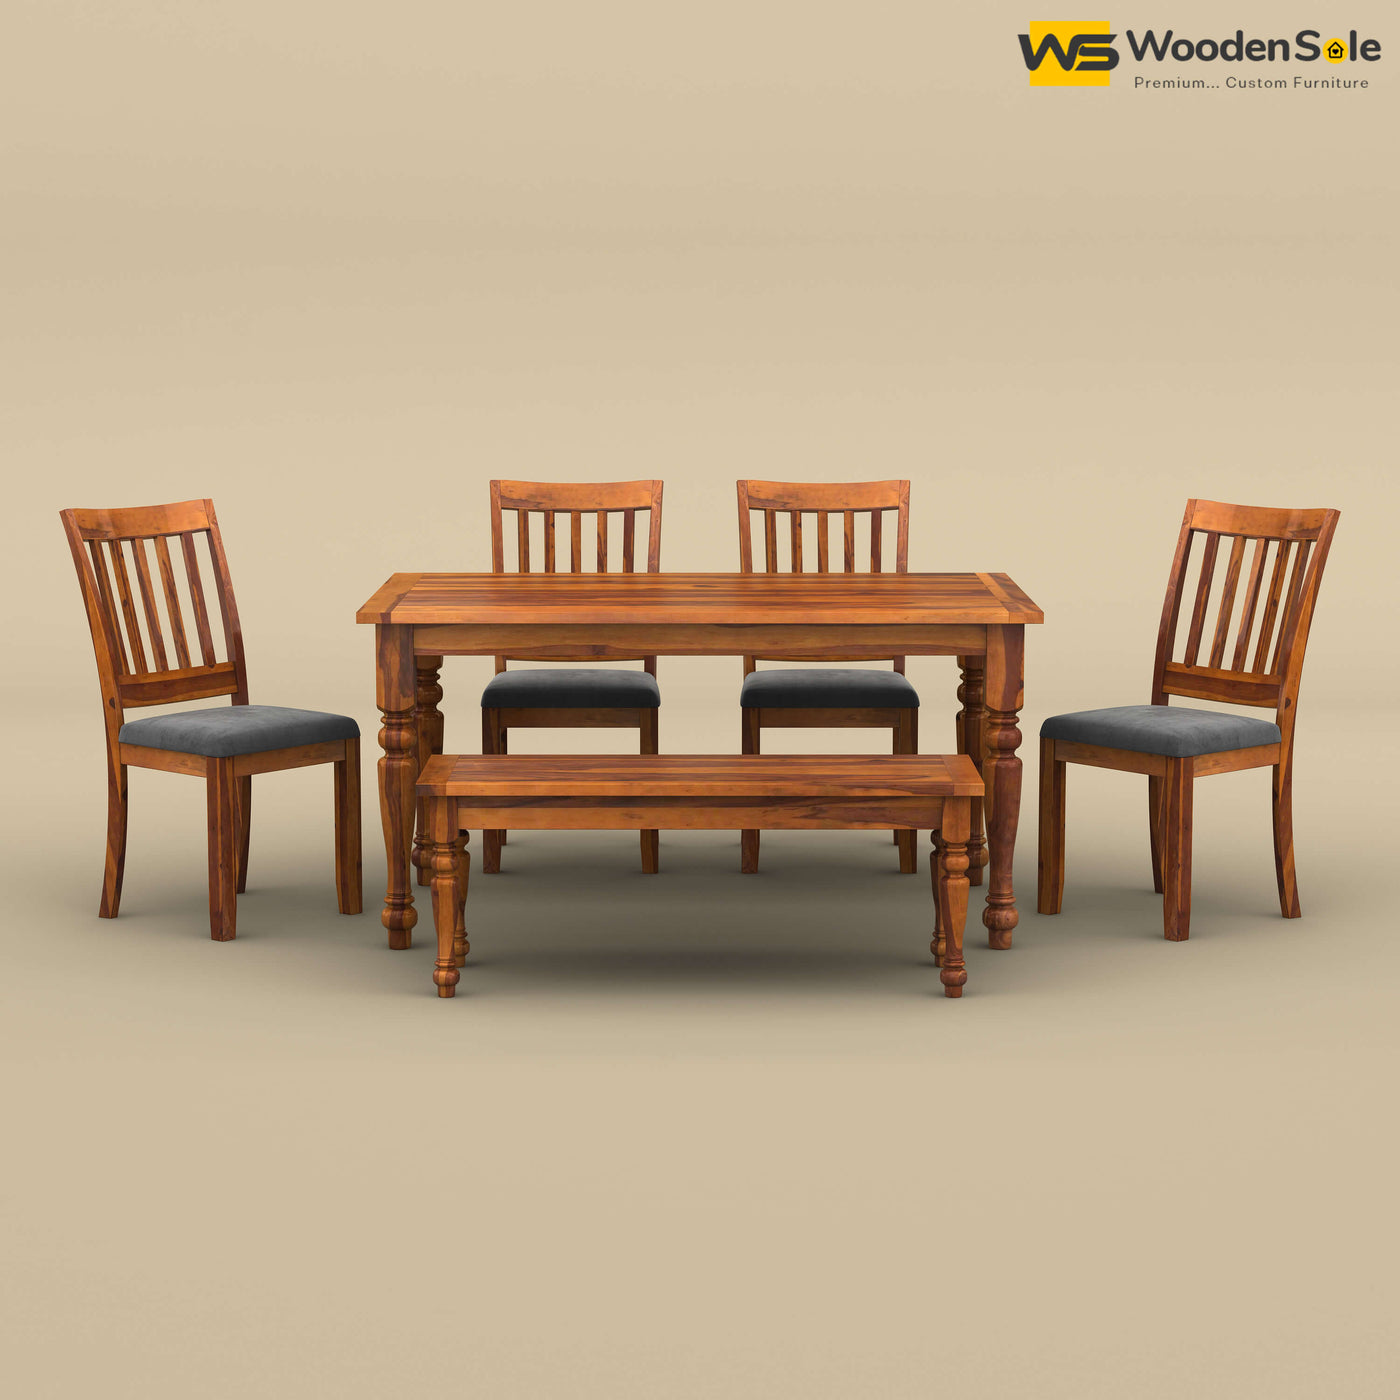 Martha 6 Seater Dining Table Set with Bench (Honey Finish)